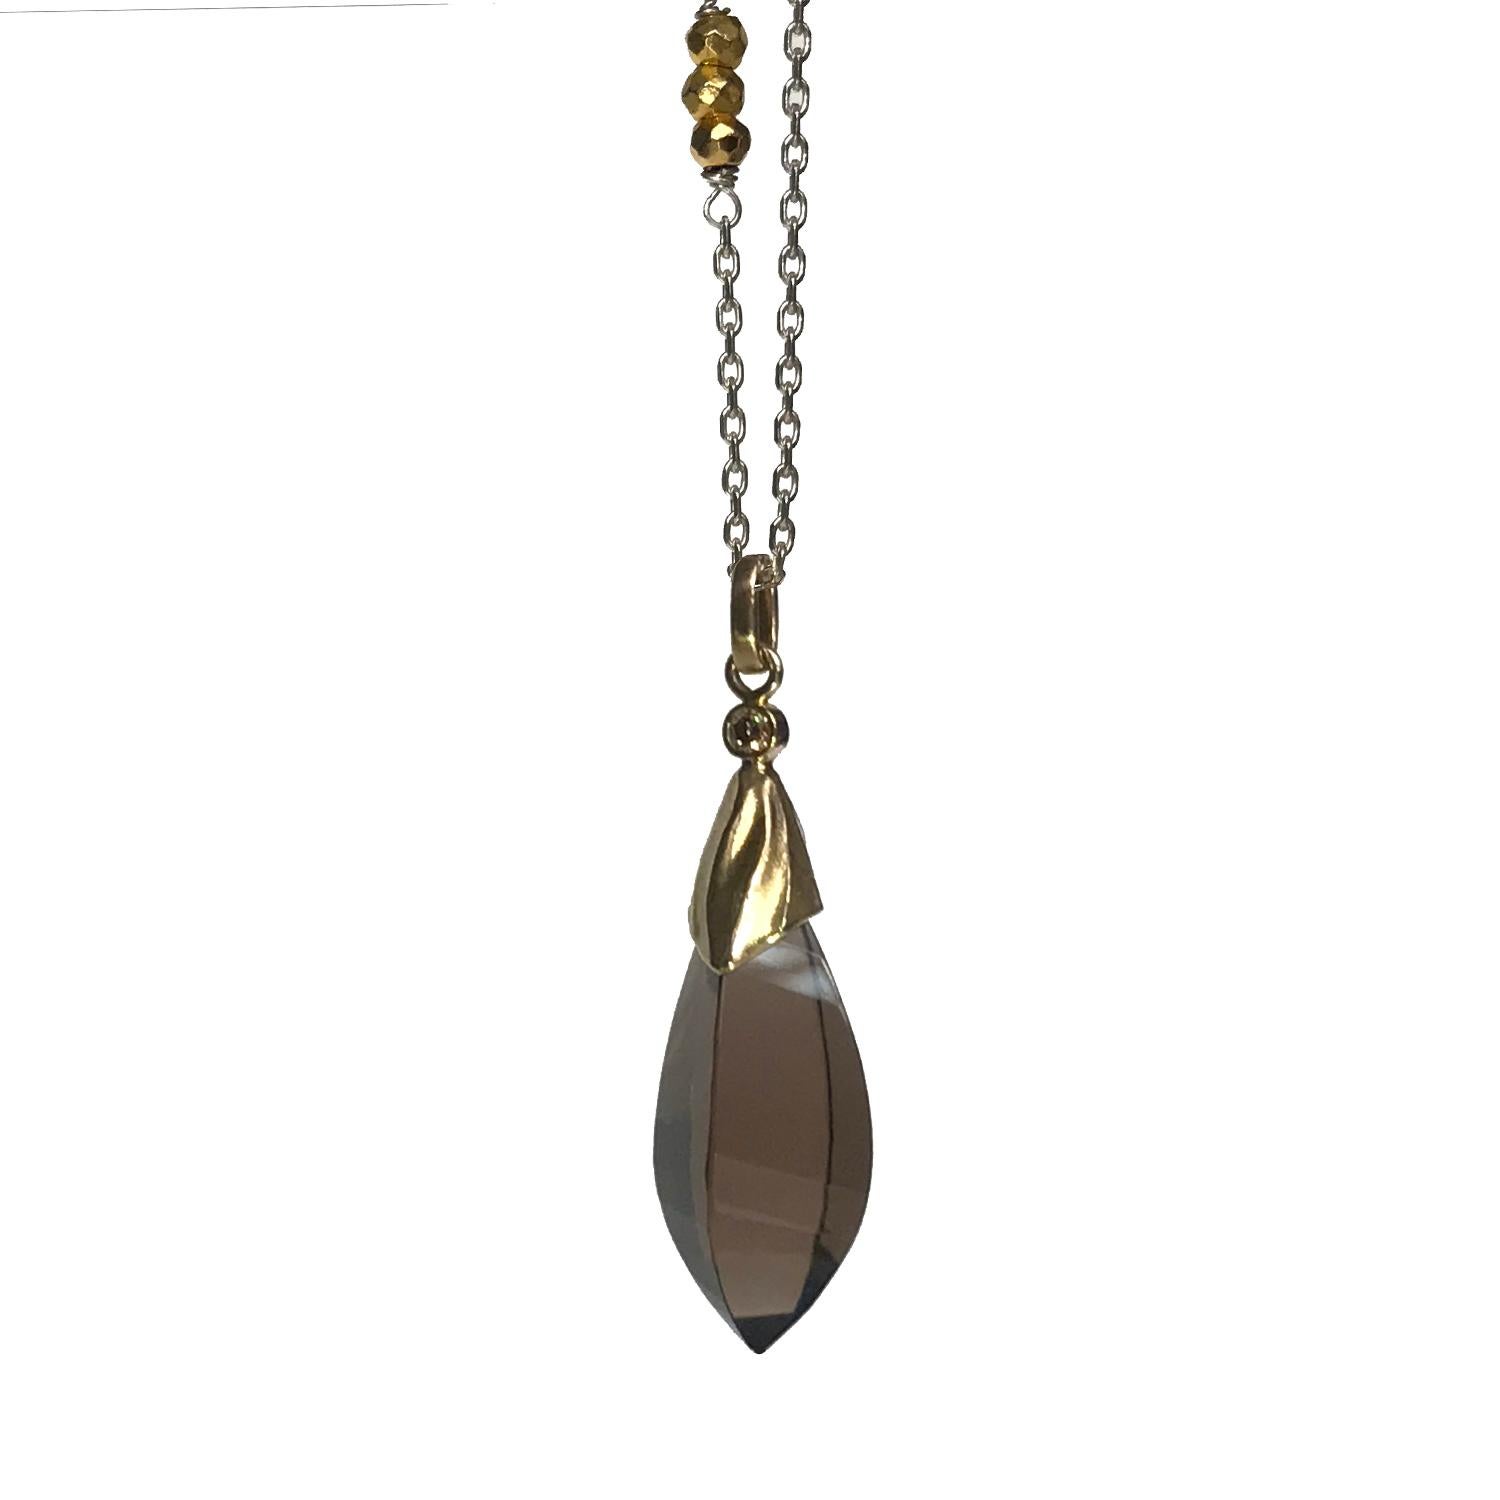 The smoky quartz pendant is handmade from  14 Karat Yellow Gold and features a faceted twisted 21.3 Carat Smokey Quartz accented with a 0.06 Carat Brown Diamond. 
The sterling silver chain is 30